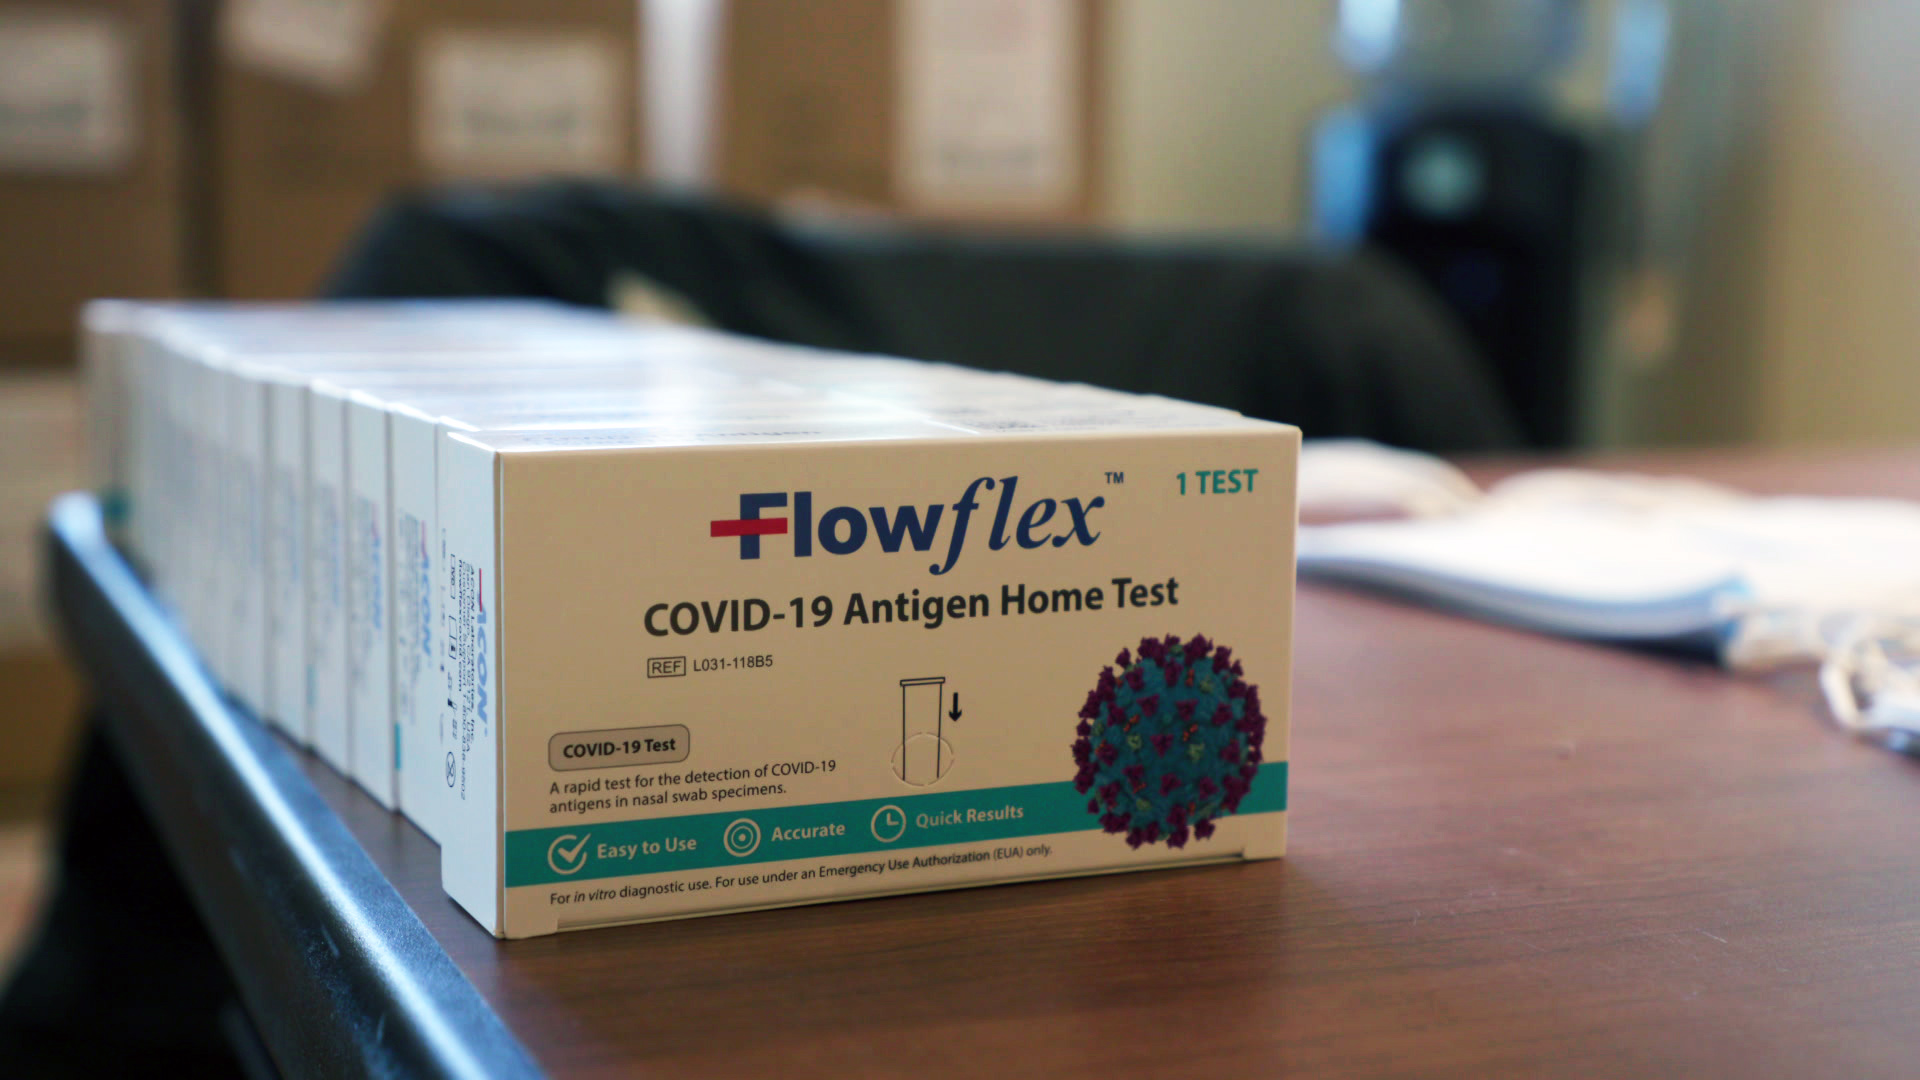 A row of FlowFlex COVID-19 Antigen Home Test boxes sits on top of a table.